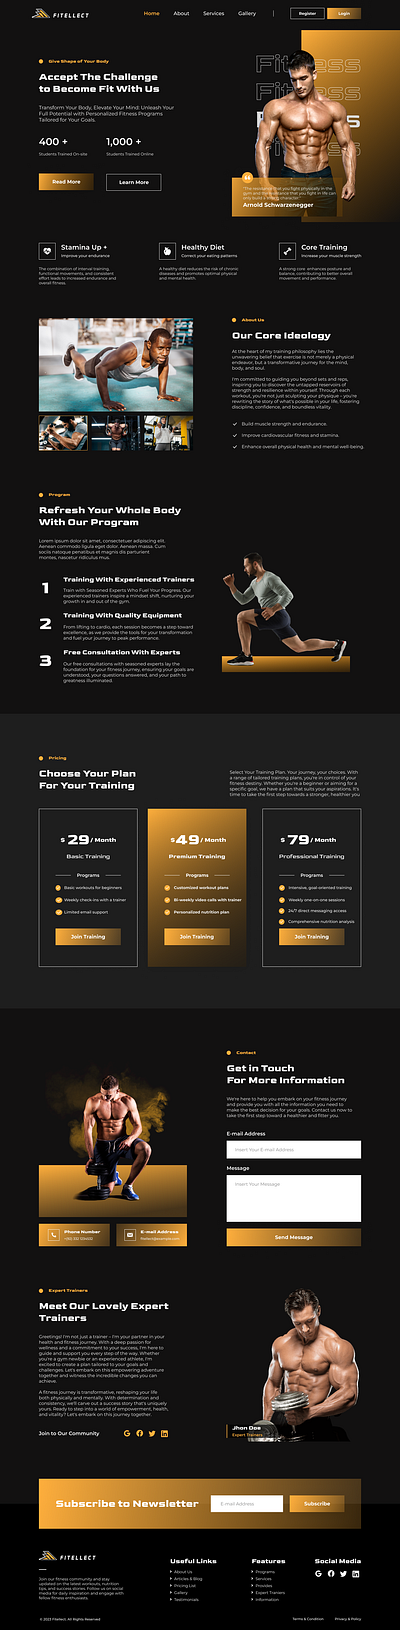 Fitellect (Personal trainer app)